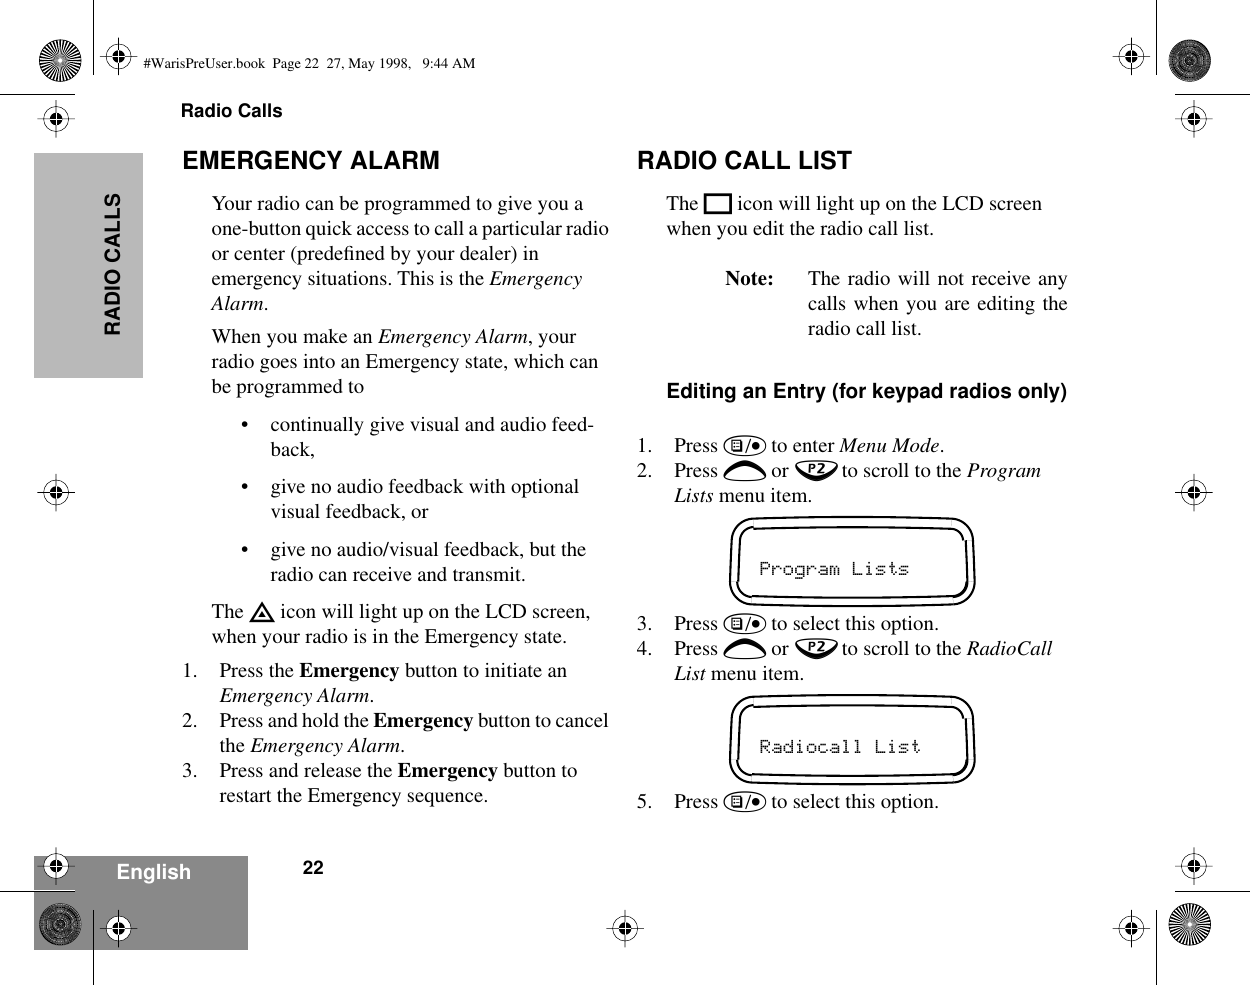 Radio Calls22EnglishRADIO CALLSEMERGENCY ALARMYour radio can be programmed to give you a one-button quick access to call a particular radio or center (predeﬁned by your dealer) in emergency situations. This is the Emergency Alarm.When you make an Emergency Alarm, your radio goes into an Emergency state, which can be programmed to• continually give visual and audio feed-back,• give no audio feedback with optional visual feedback, or• give no audio/visual feedback, but the radio can receive and transmit.The E icon will light up on the LCD screen, when your radio is in the Emergency state.1. Press the Emergency button to initiate an Emergency Alarm.2. Press and hold the Emergency button to cancel the Emergency Alarm.3. Press and release the Emergency button to restart the Emergency sequence.RADIO CALL LISTThe K icon will light up on the LCD screen when you edit the radio call list.Note: The radio will not receive anycalls when you are editing theradio call list.Editing an Entry (for keypad radios only)1. Press ) to enter Menu Mode.2. Press + or ? to scroll to the Program Lists menu item.3. Press ) to select this option.4. Press + or ? to scroll to the RadioCall List menu item.5. Press ) to select this option.Program ListsRadiocall List#WarisPreUser.book  Page 22  27, May 1998,   9:44 AM